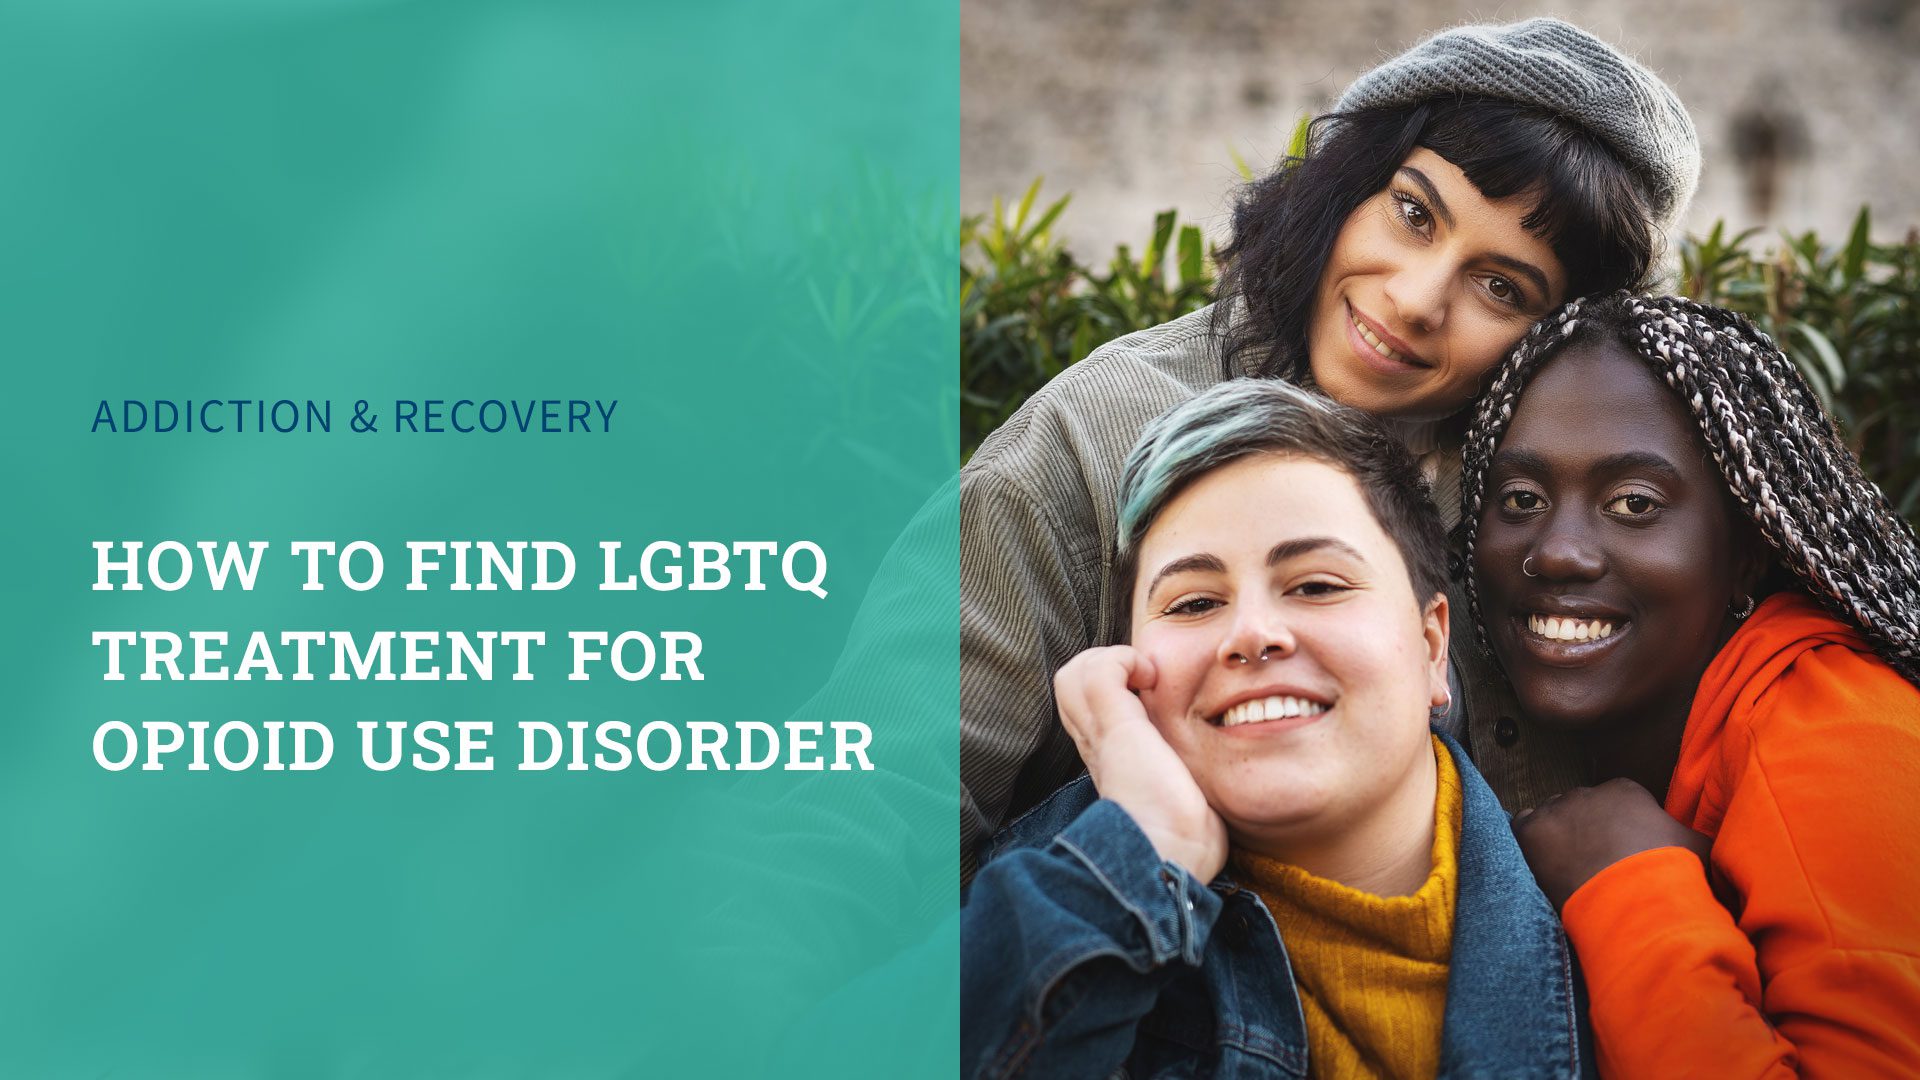 How to Find LGBTQ Treatment for Opioid Use Disorder